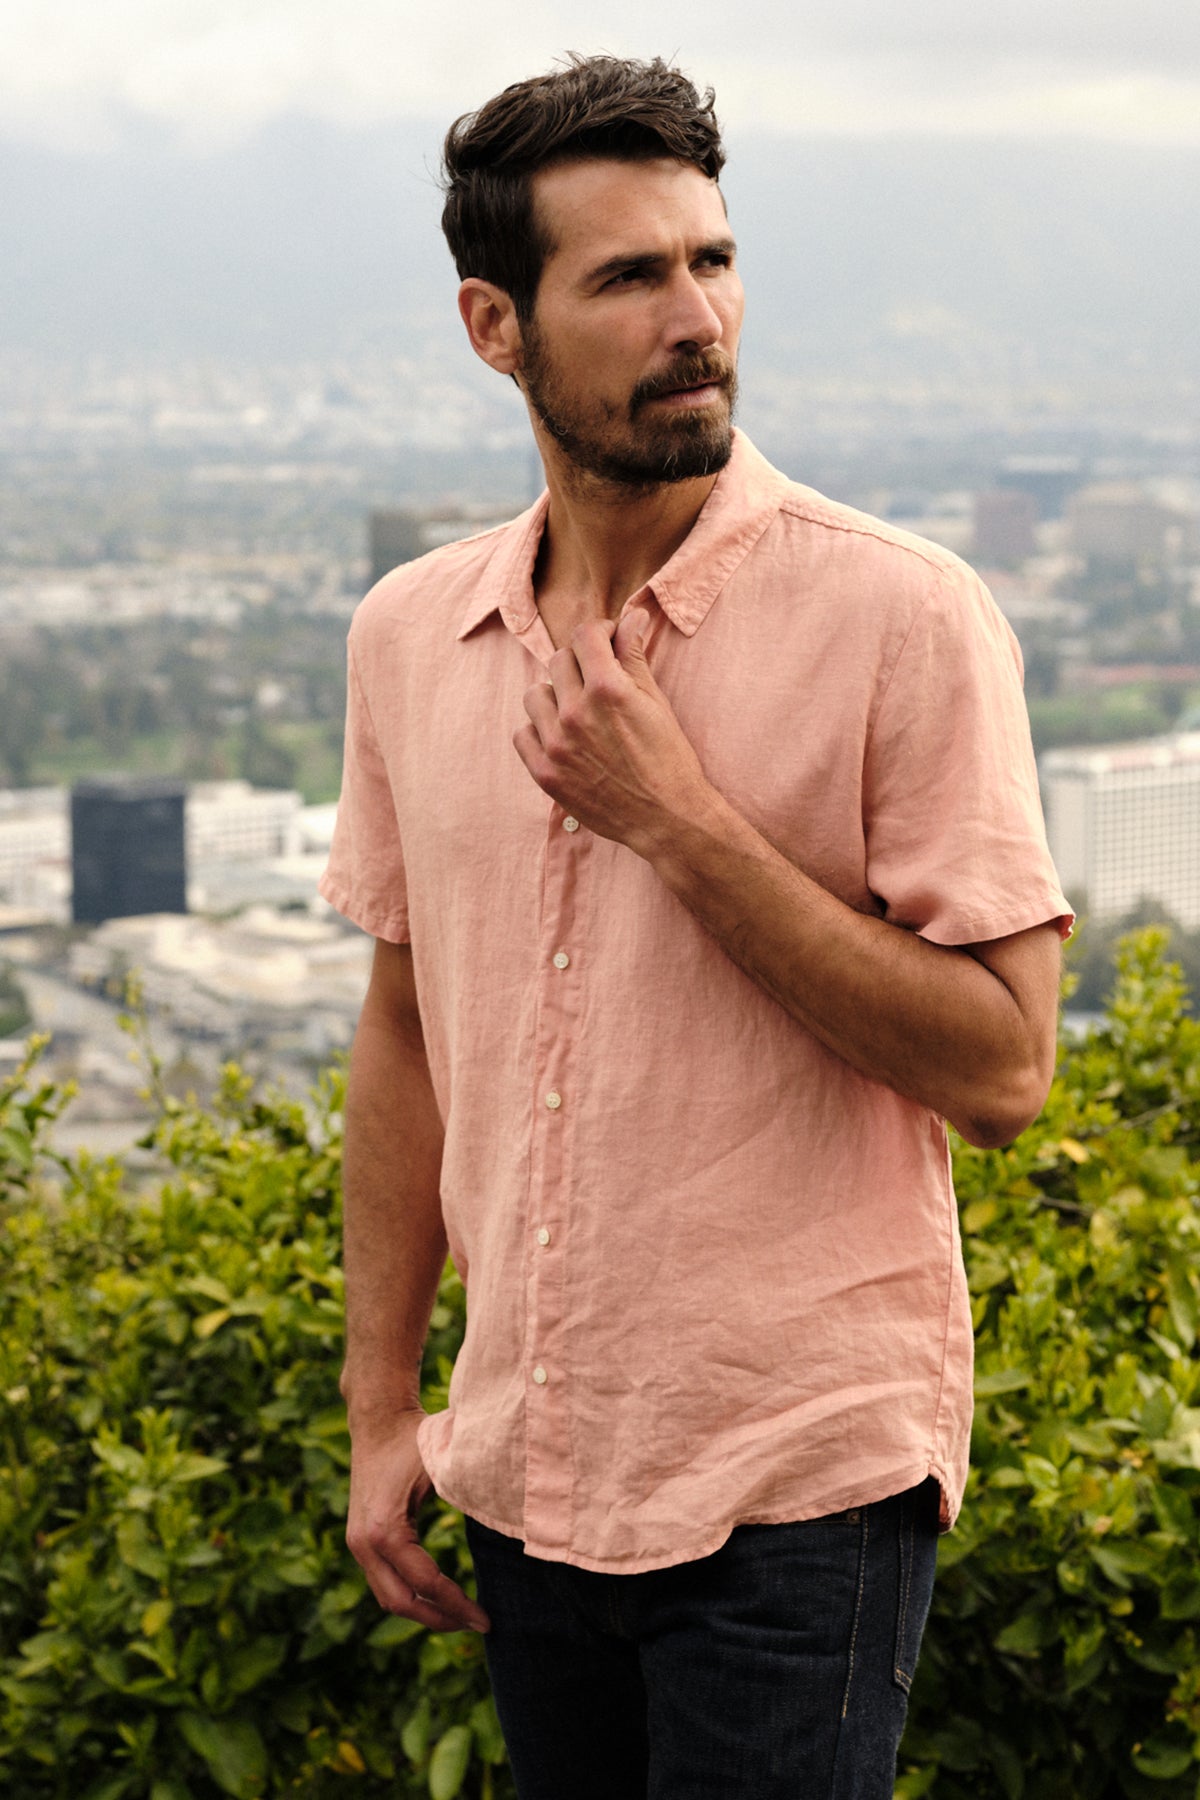 Mackie Button-Up Shirt in bronze with dark denim, model standing outdoors near greenery overlooking downtown-26468736729281